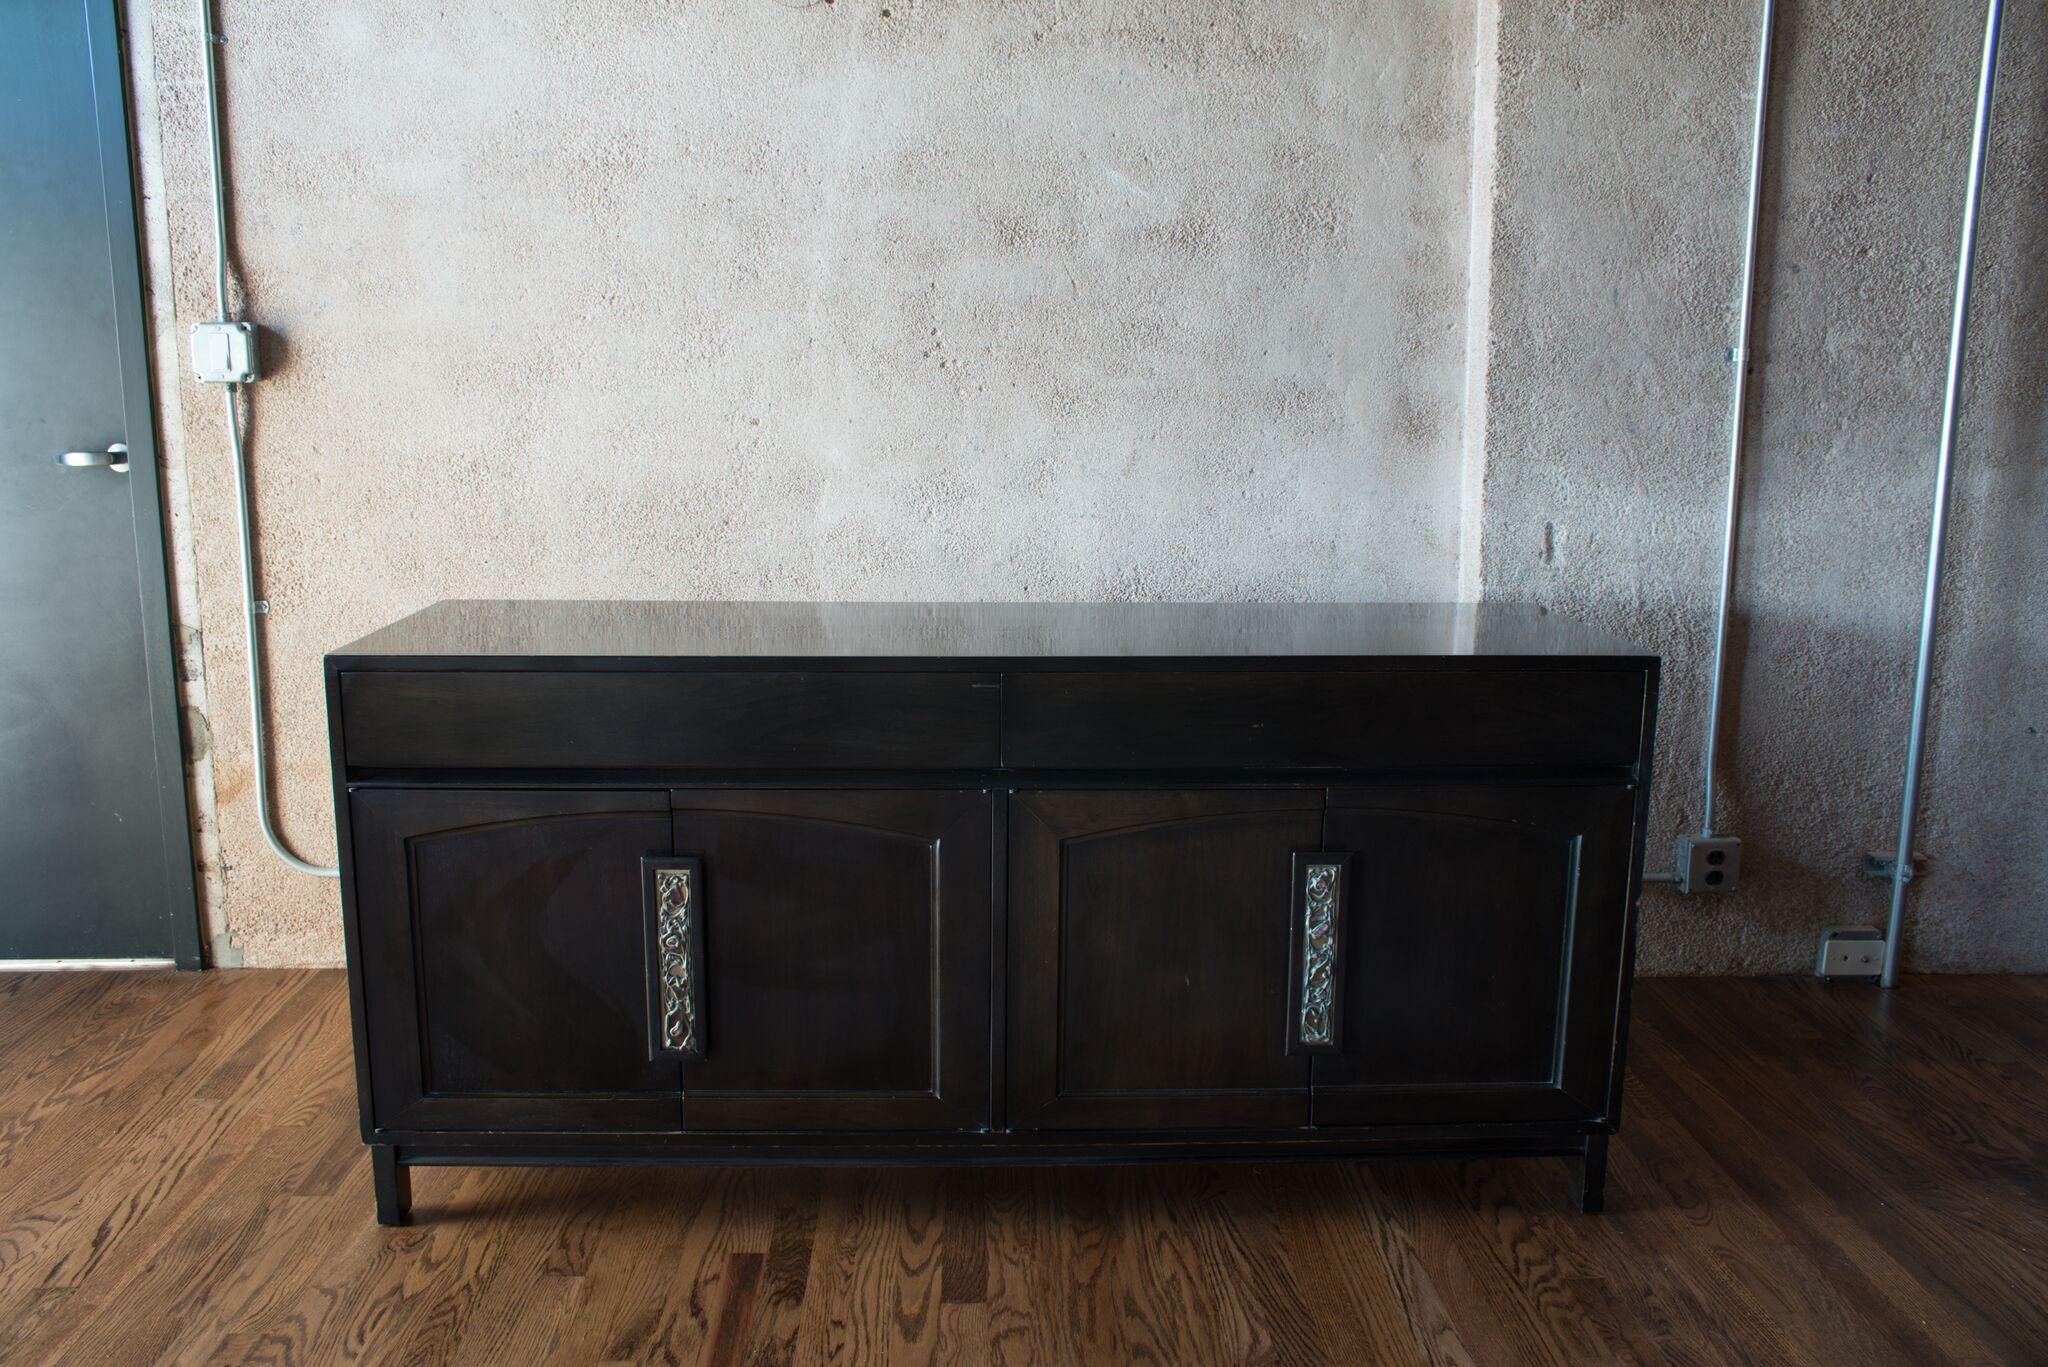 Credenza or buffet designed by John Keal for Brown Saltman. 

A piece from a rare series of case pieces designed by John Keal and produced by Brown Saltman, circa 1958. Stout, expertly made walnut case construction with great movement and color.